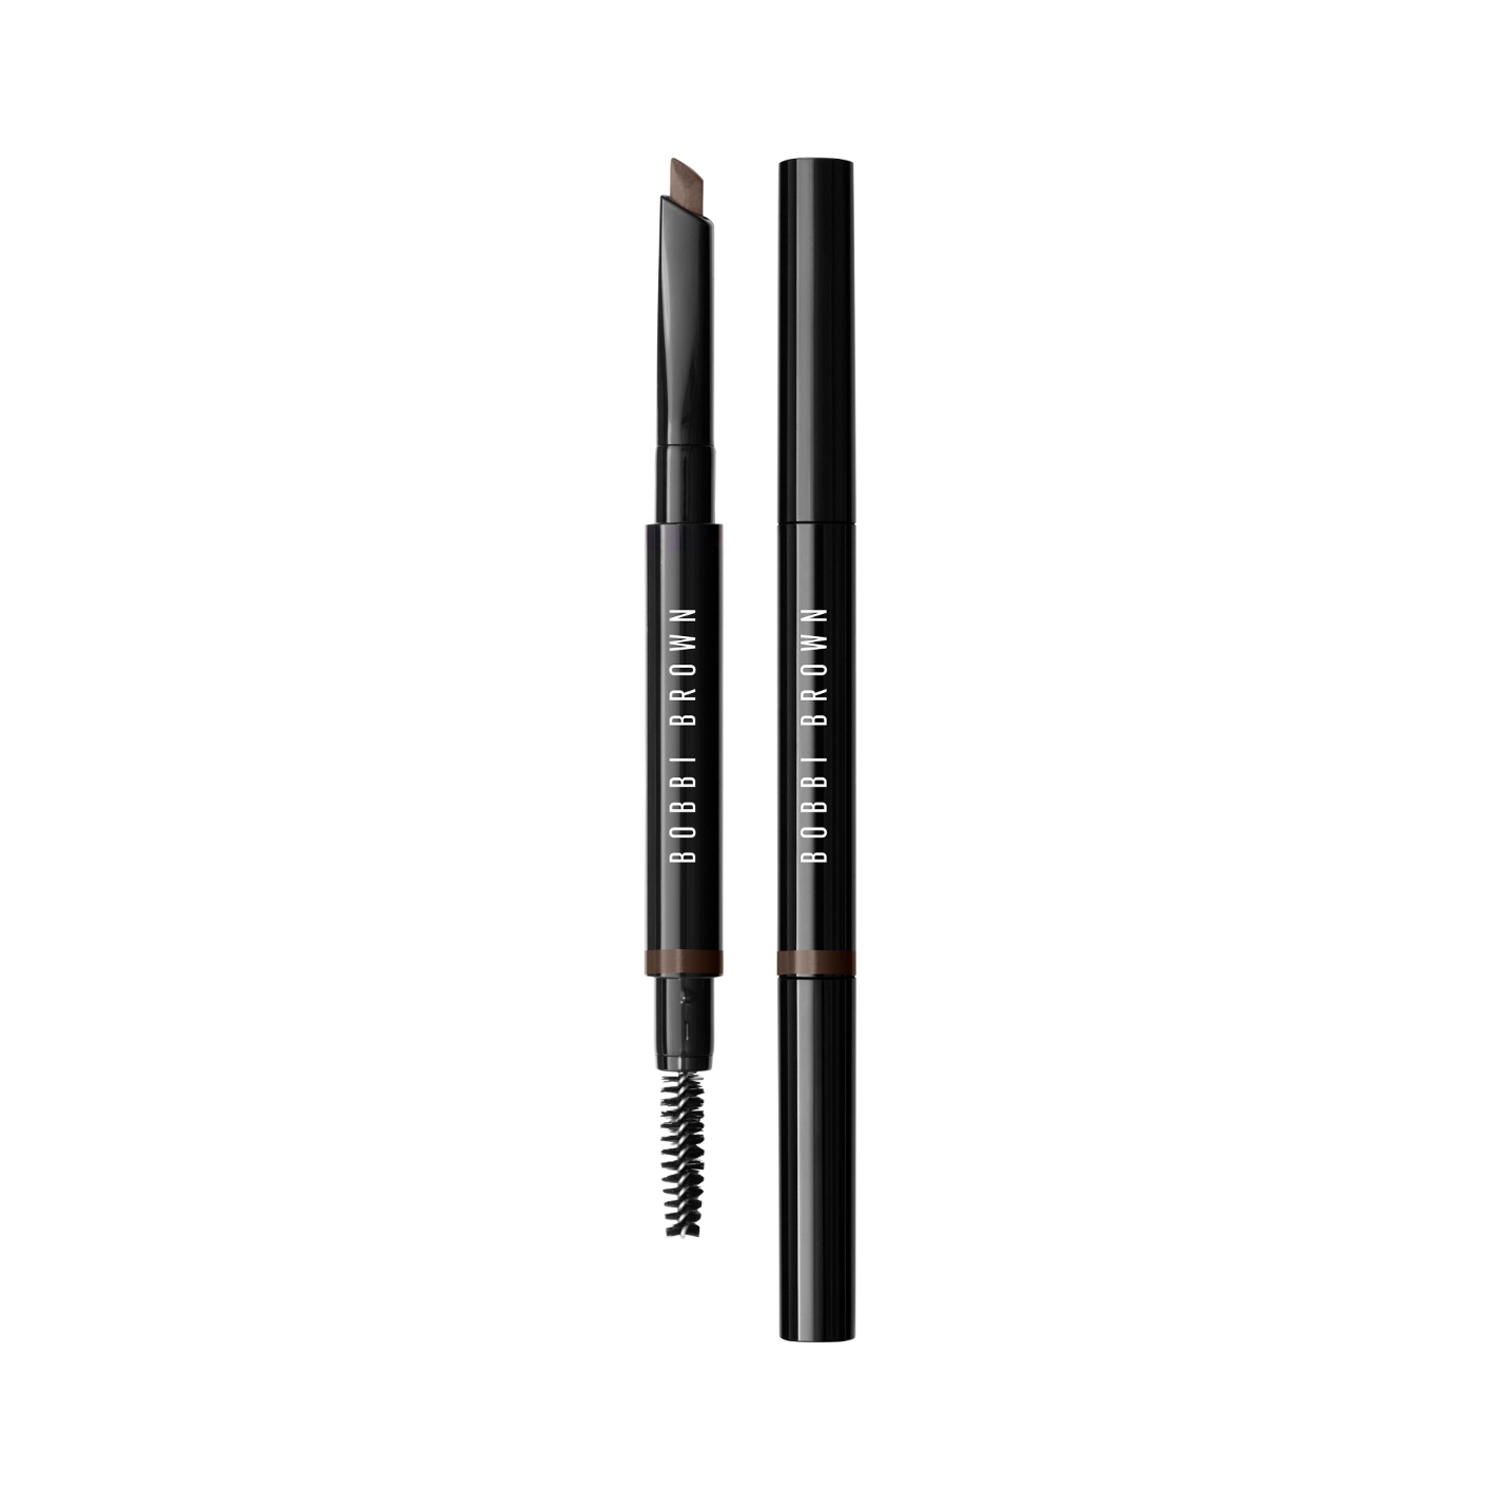 Bobbi Brown Perfectly Defined Long-Wear Brow Pencil - Rich Brown (0.33g)